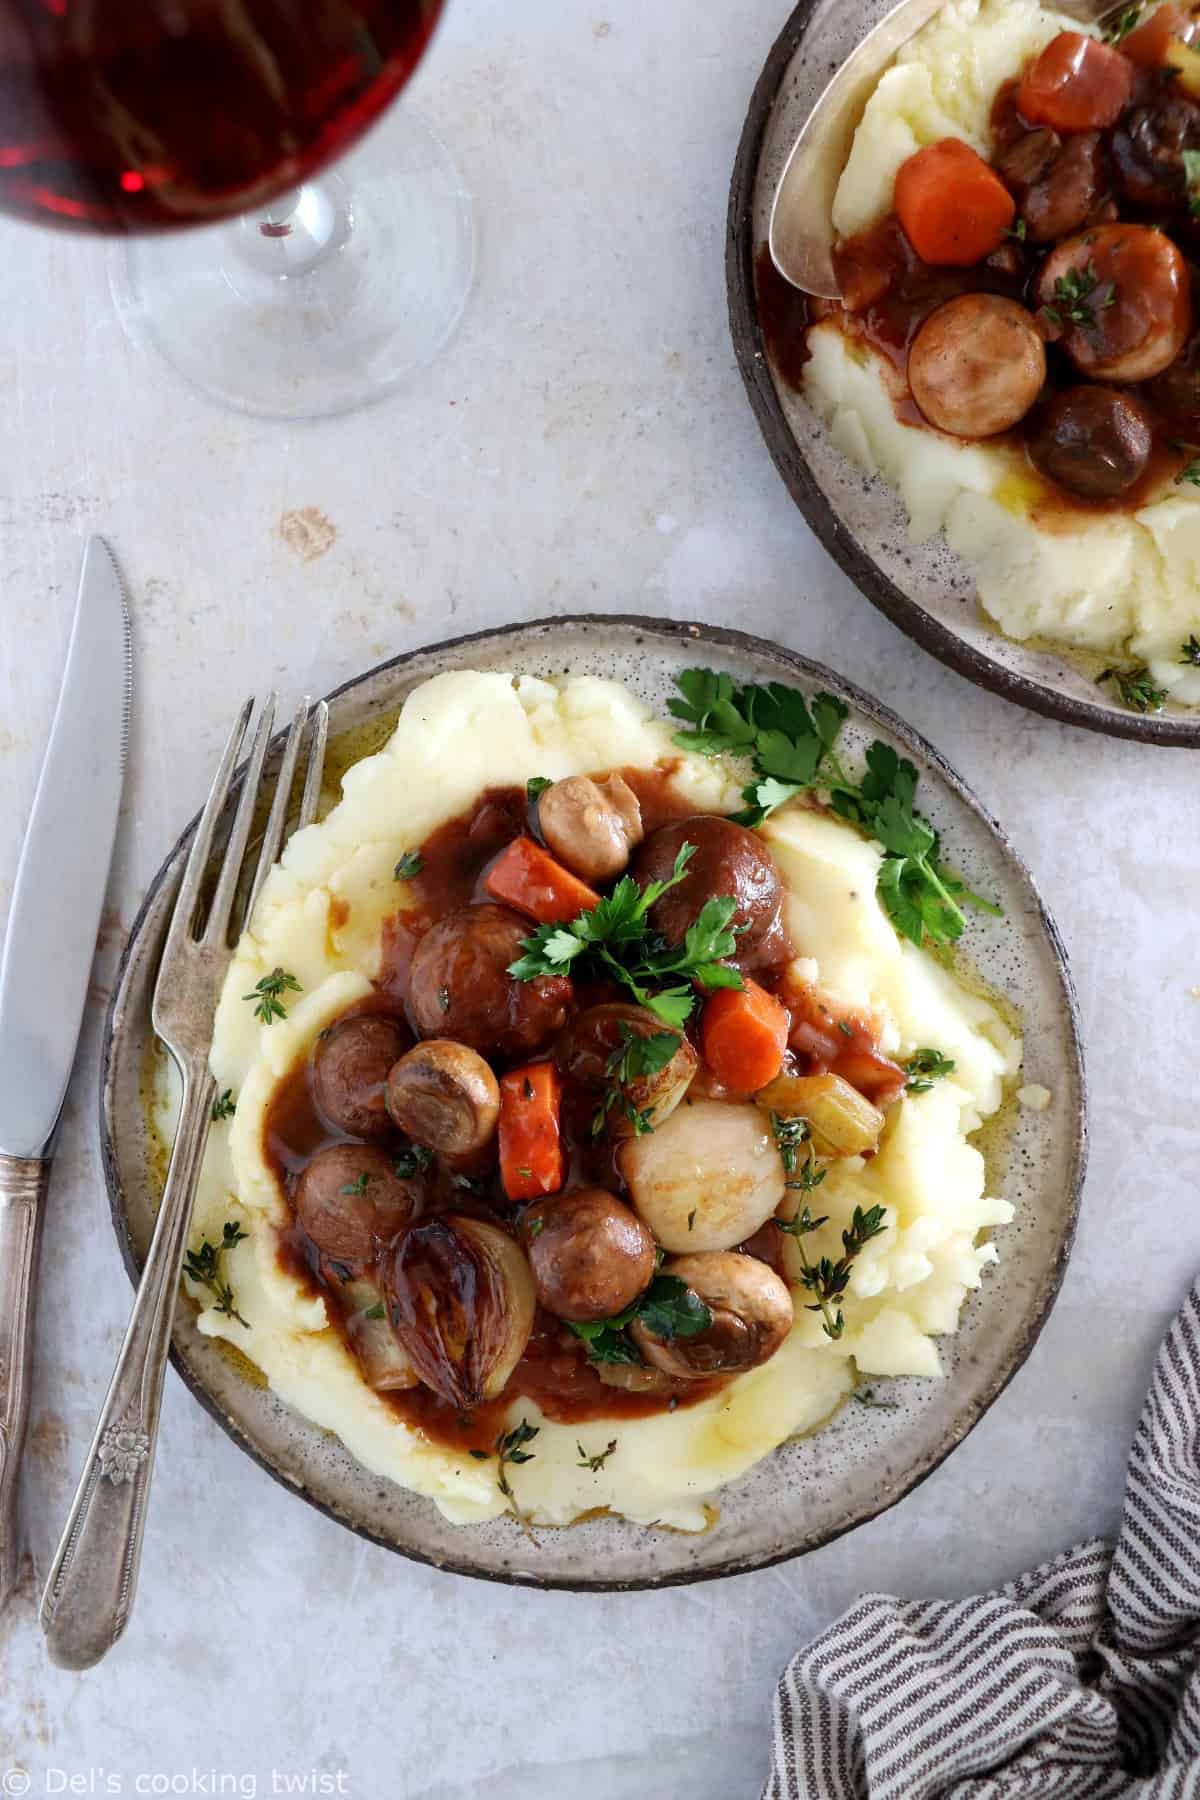 This rich and saucy mushroom bourguignon is a wonderful vegetarian stew, loaded with comforting and hearty flavors.